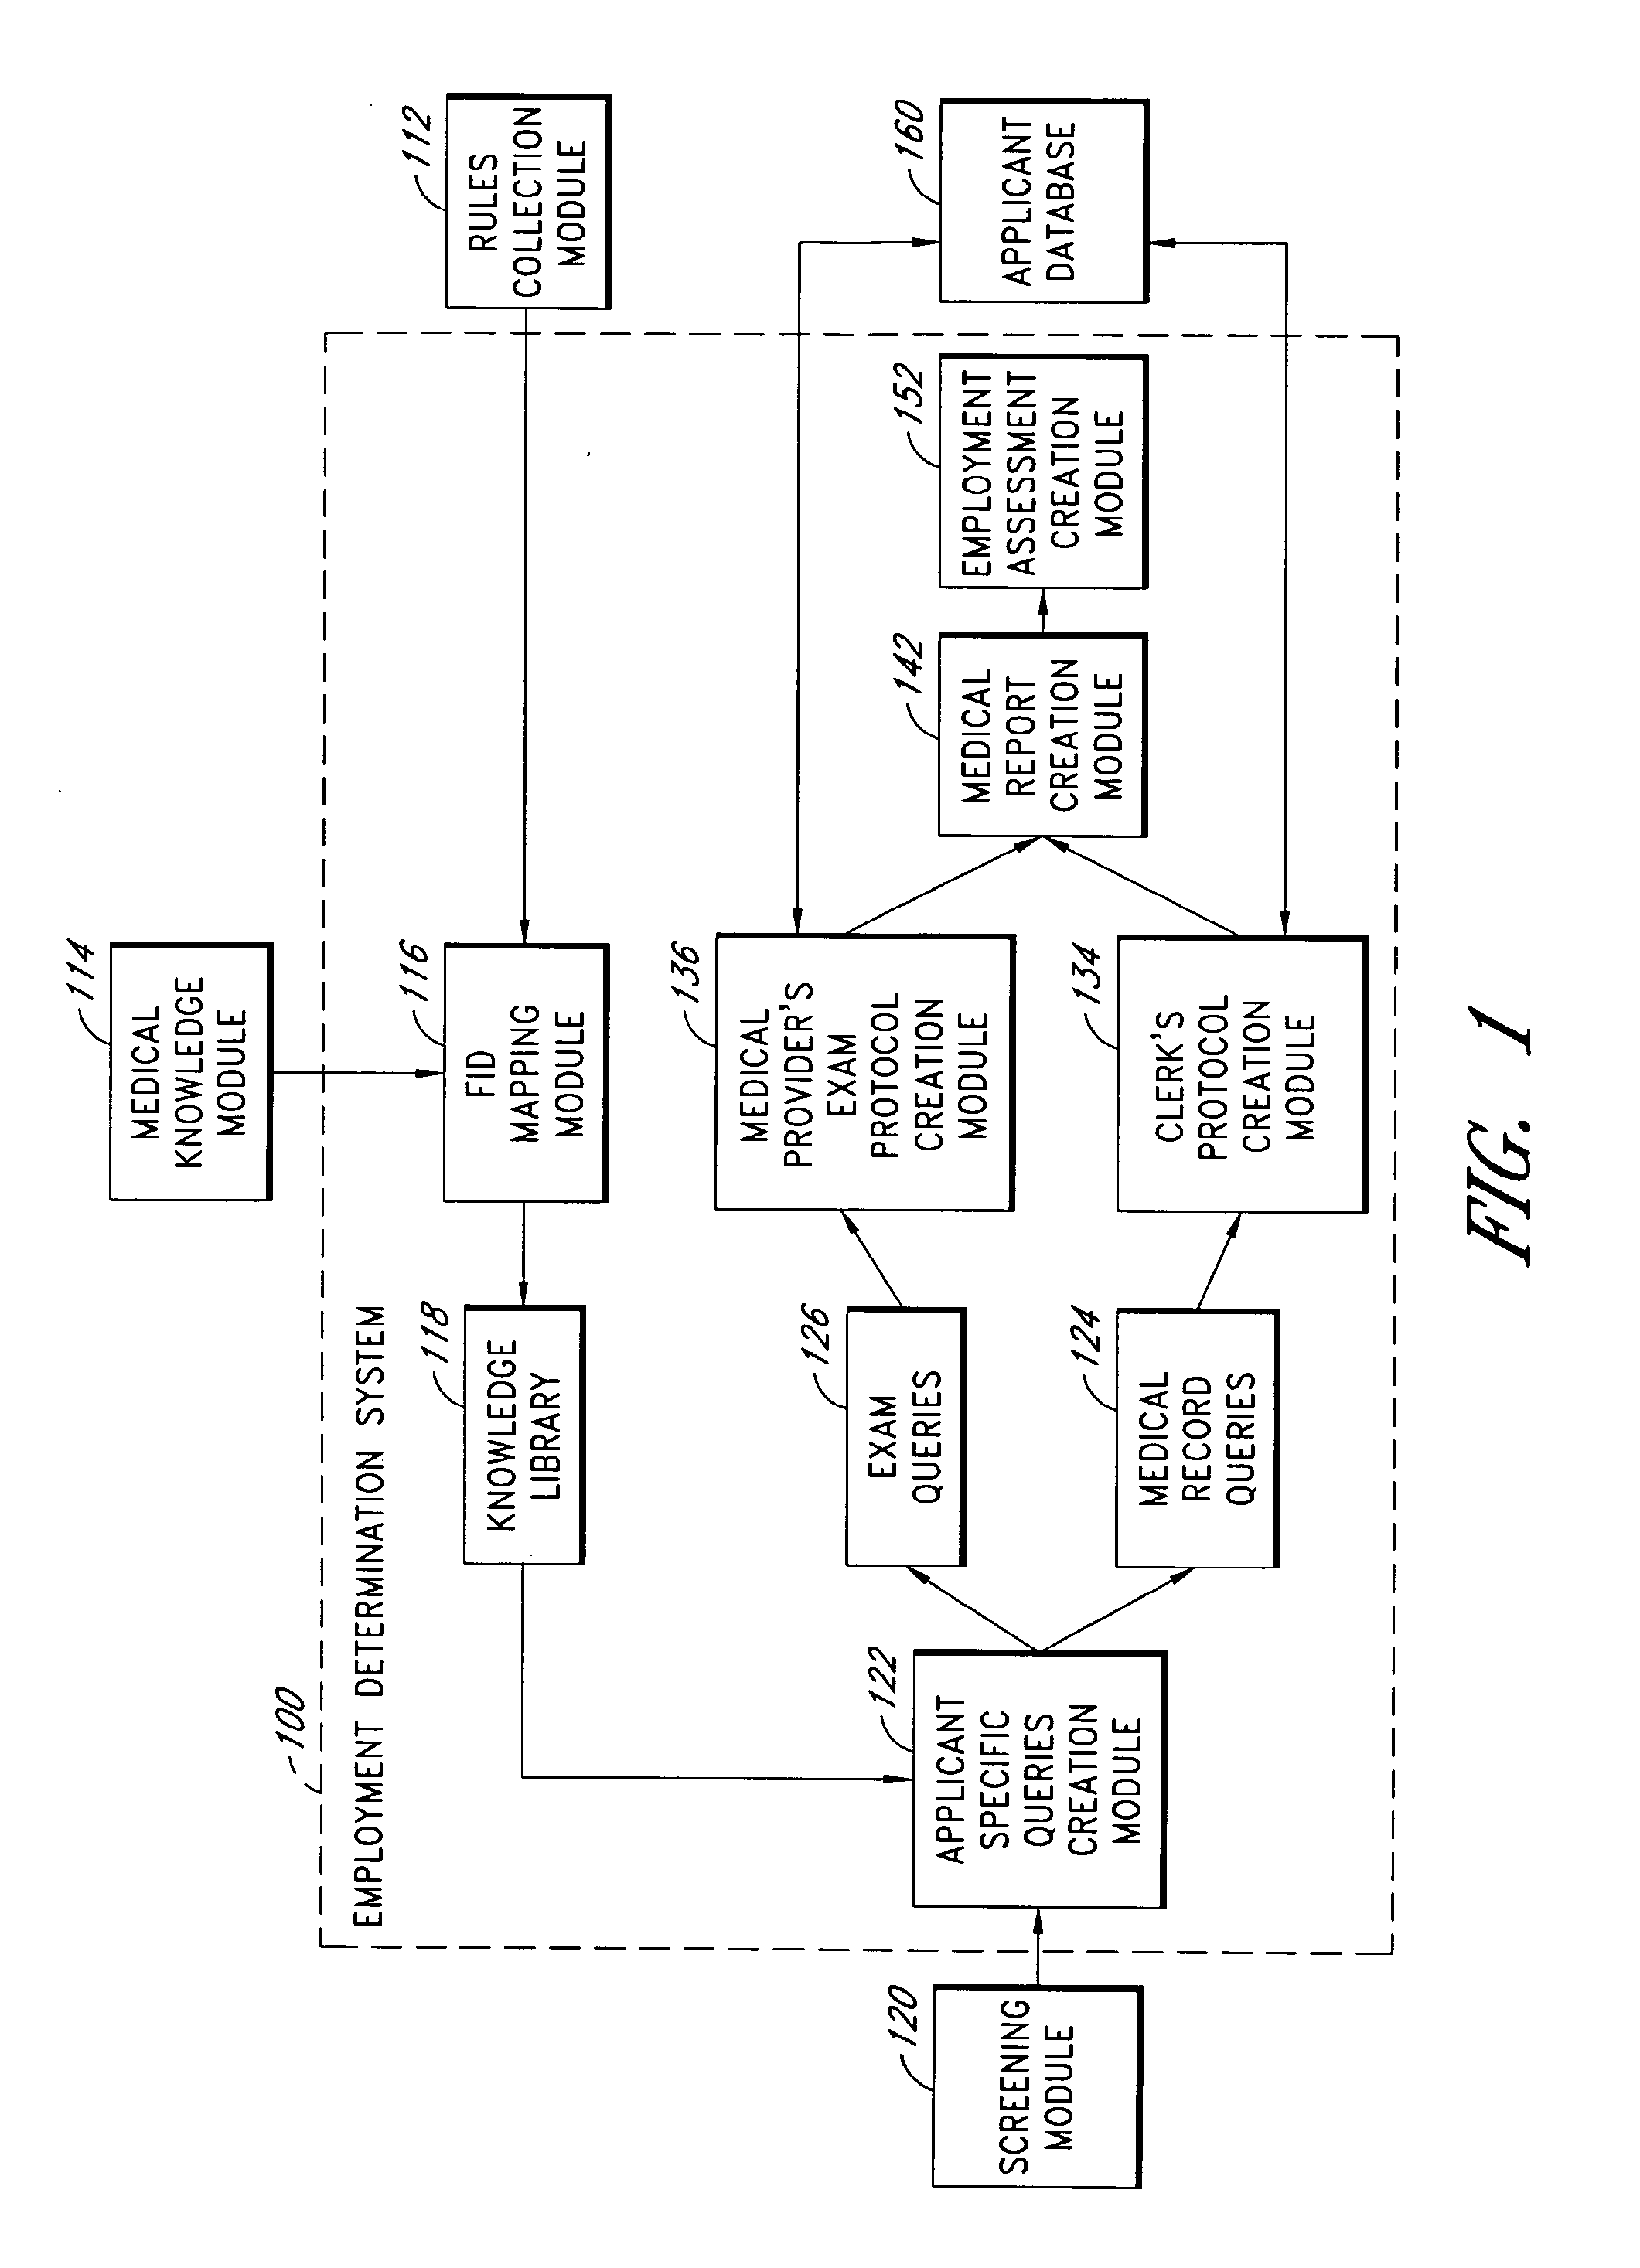 Systems and methods for processing medical data for employment determinations